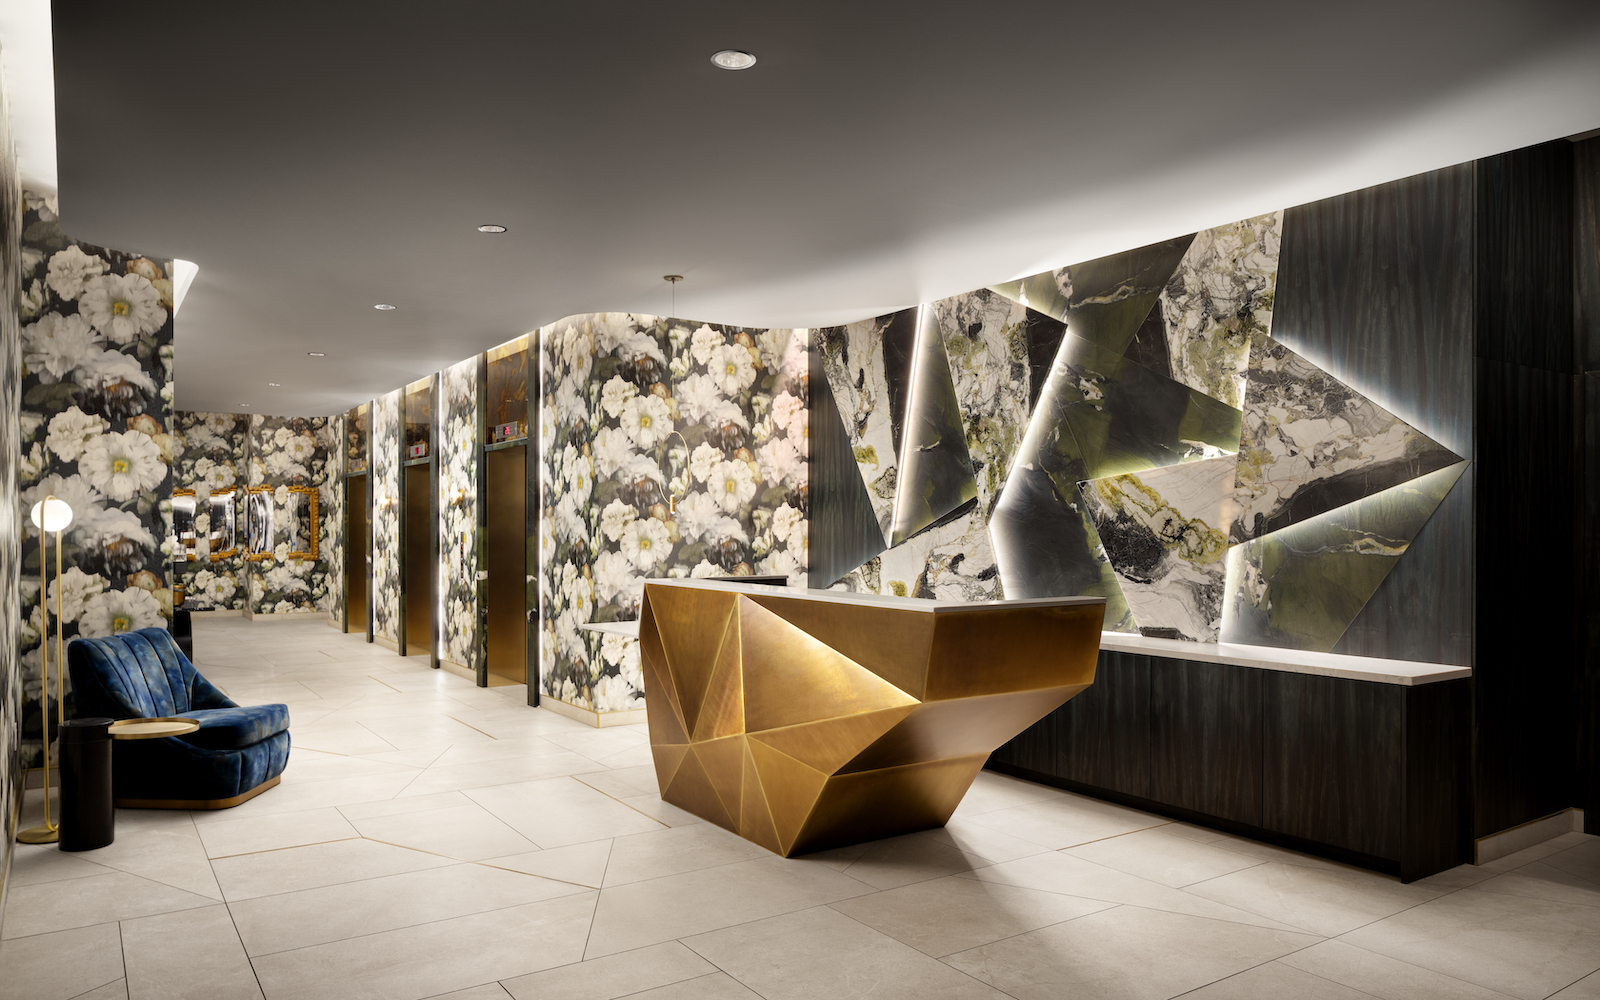 A lobby in a hotel with geometric desk and wild wallcoverings